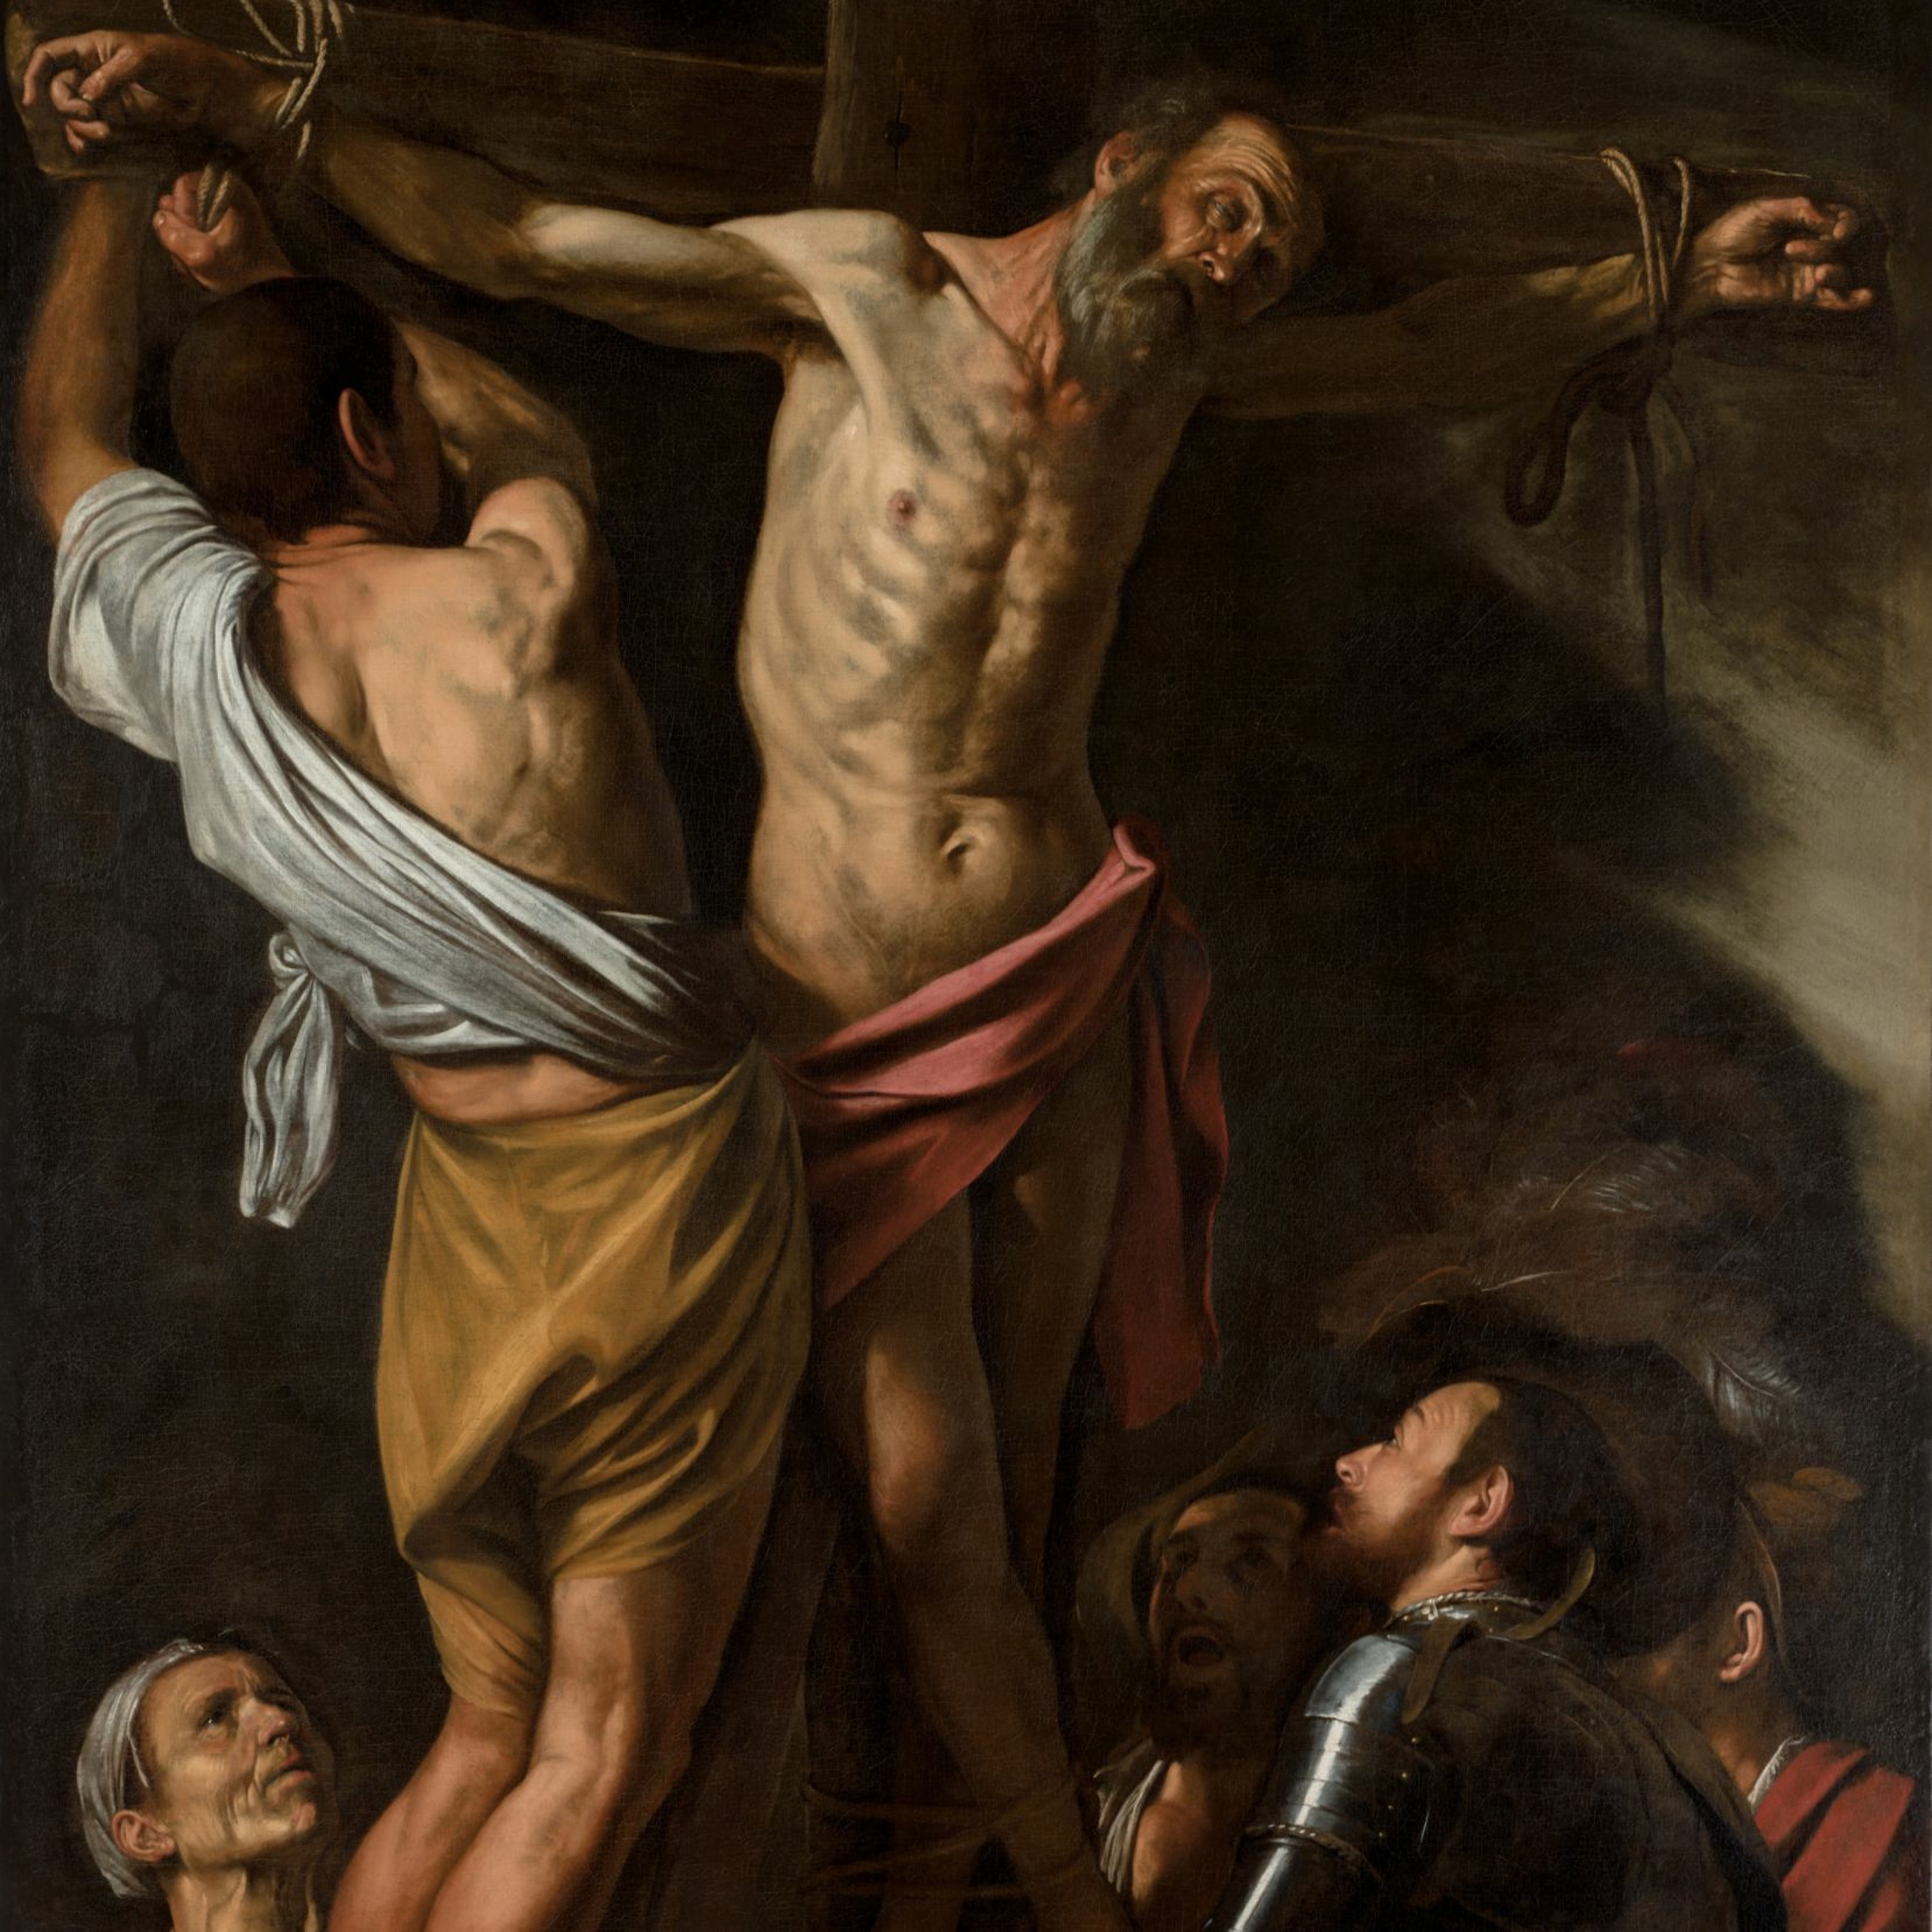 Ep. 60 - Caravaggio’s ”The Crucifixion of St. Andrew” (1607)